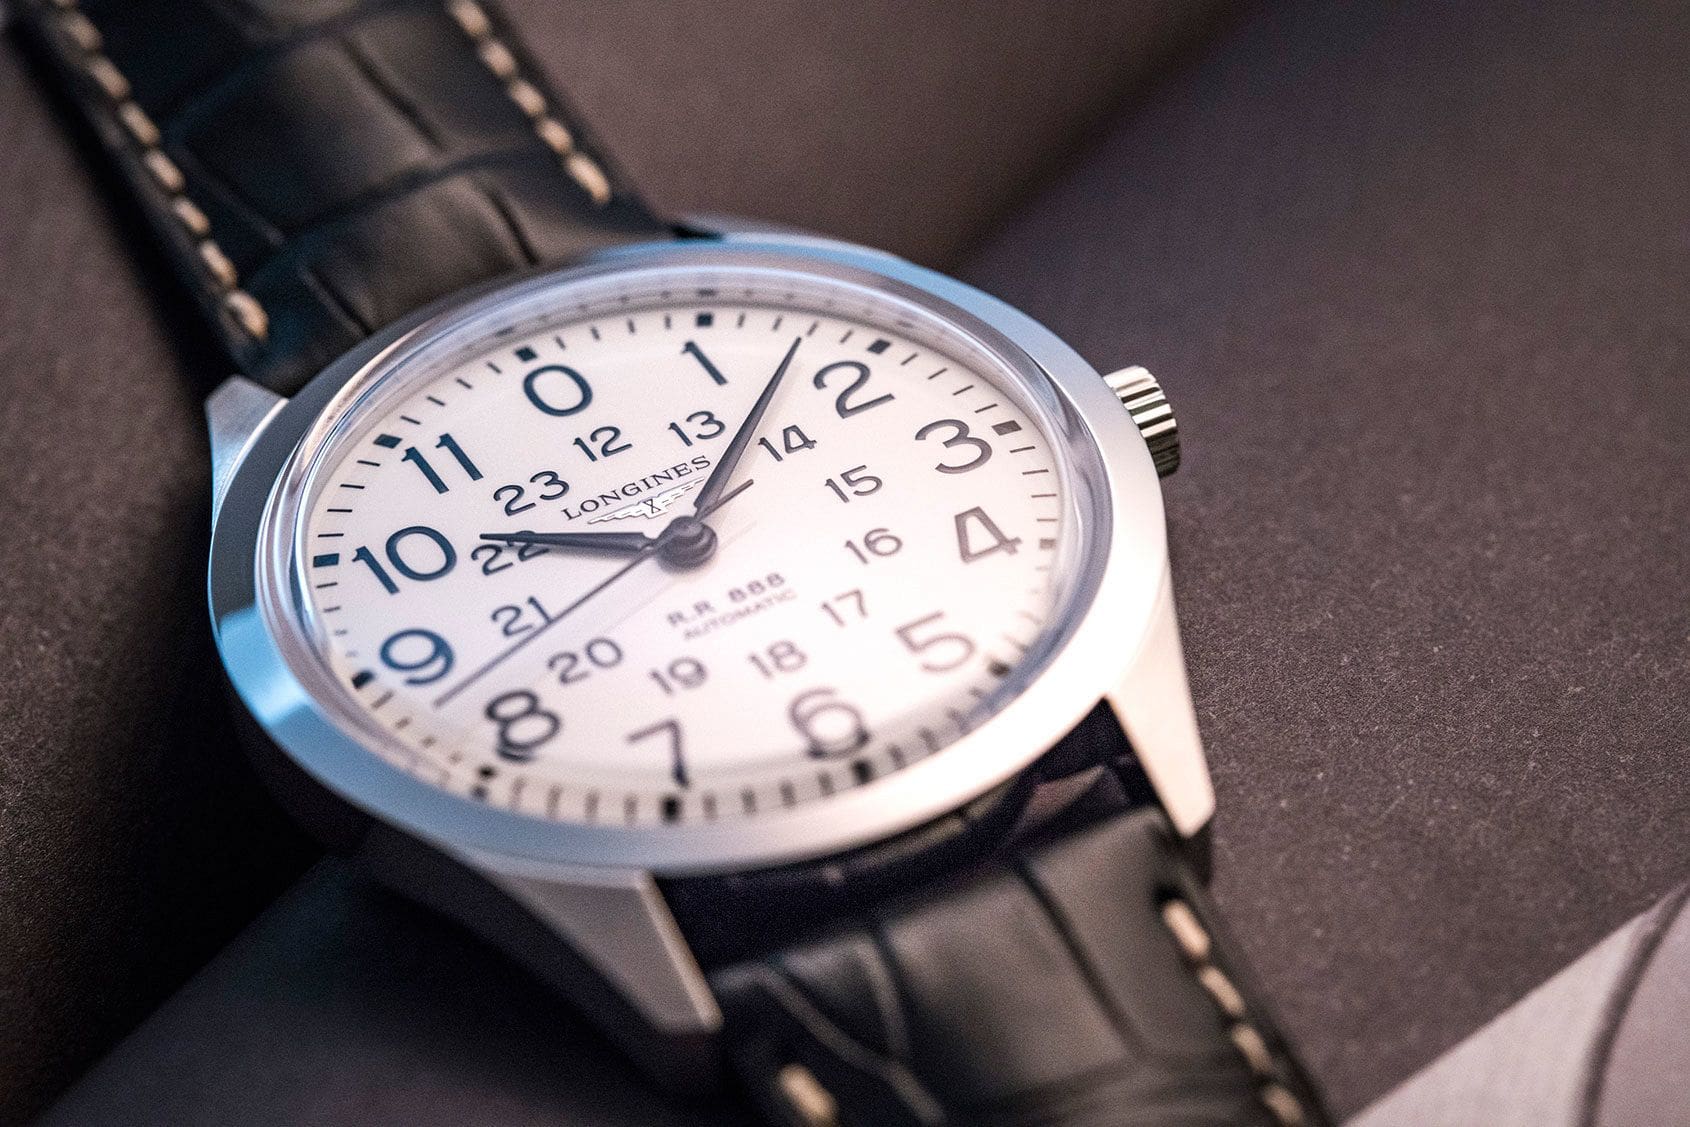 EDITOR’S PICK: Picking up speed with the Longines Railroad